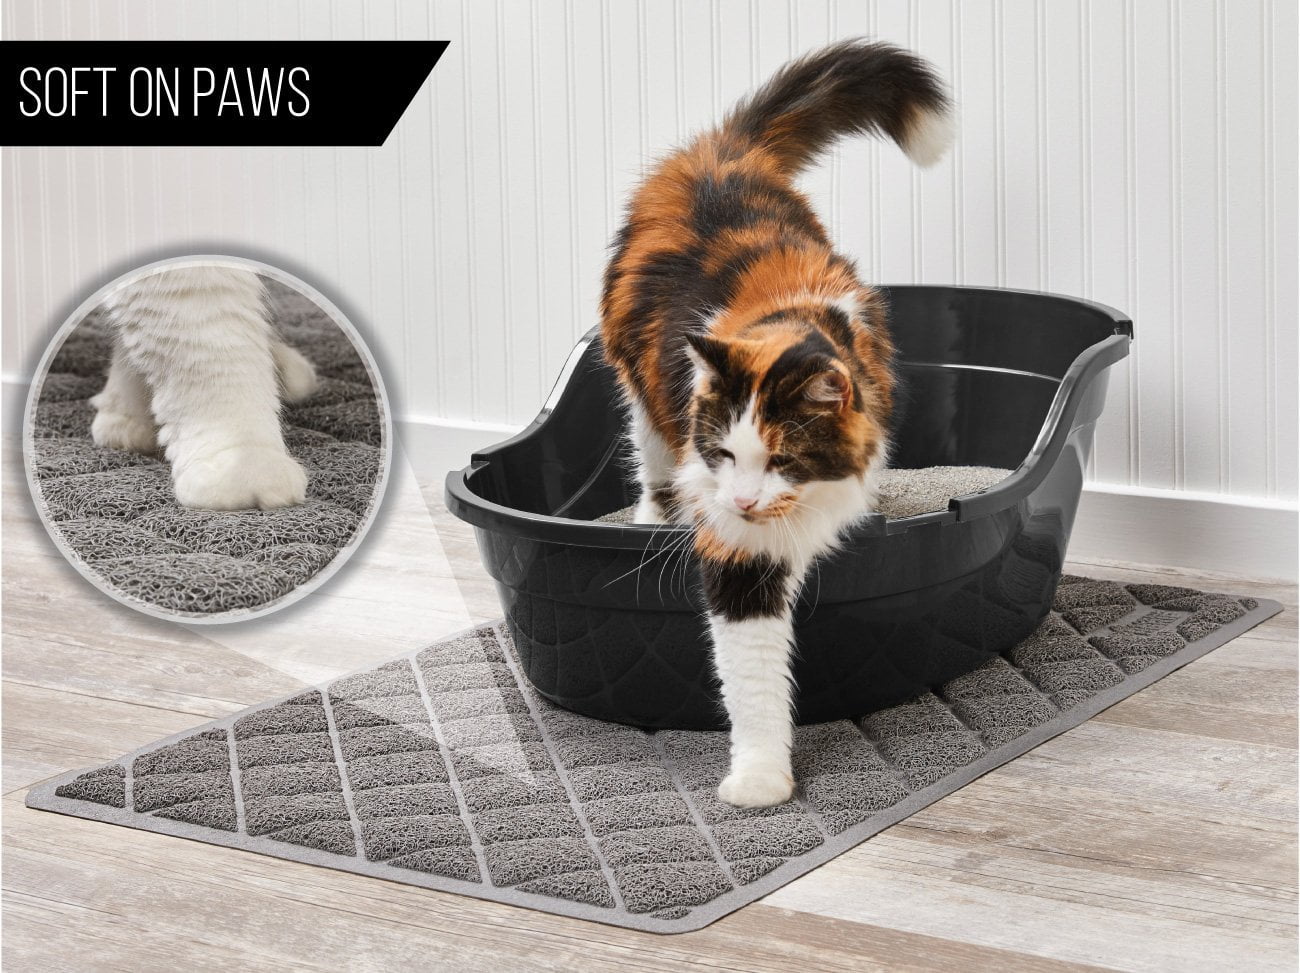 Cat Litter MAT Catcher - Smartgrip Paw-Shaped Innovative Grass-Like  Material Traps and Catches Litter While Remaining Soft On Paws - 1 Year  warranty 